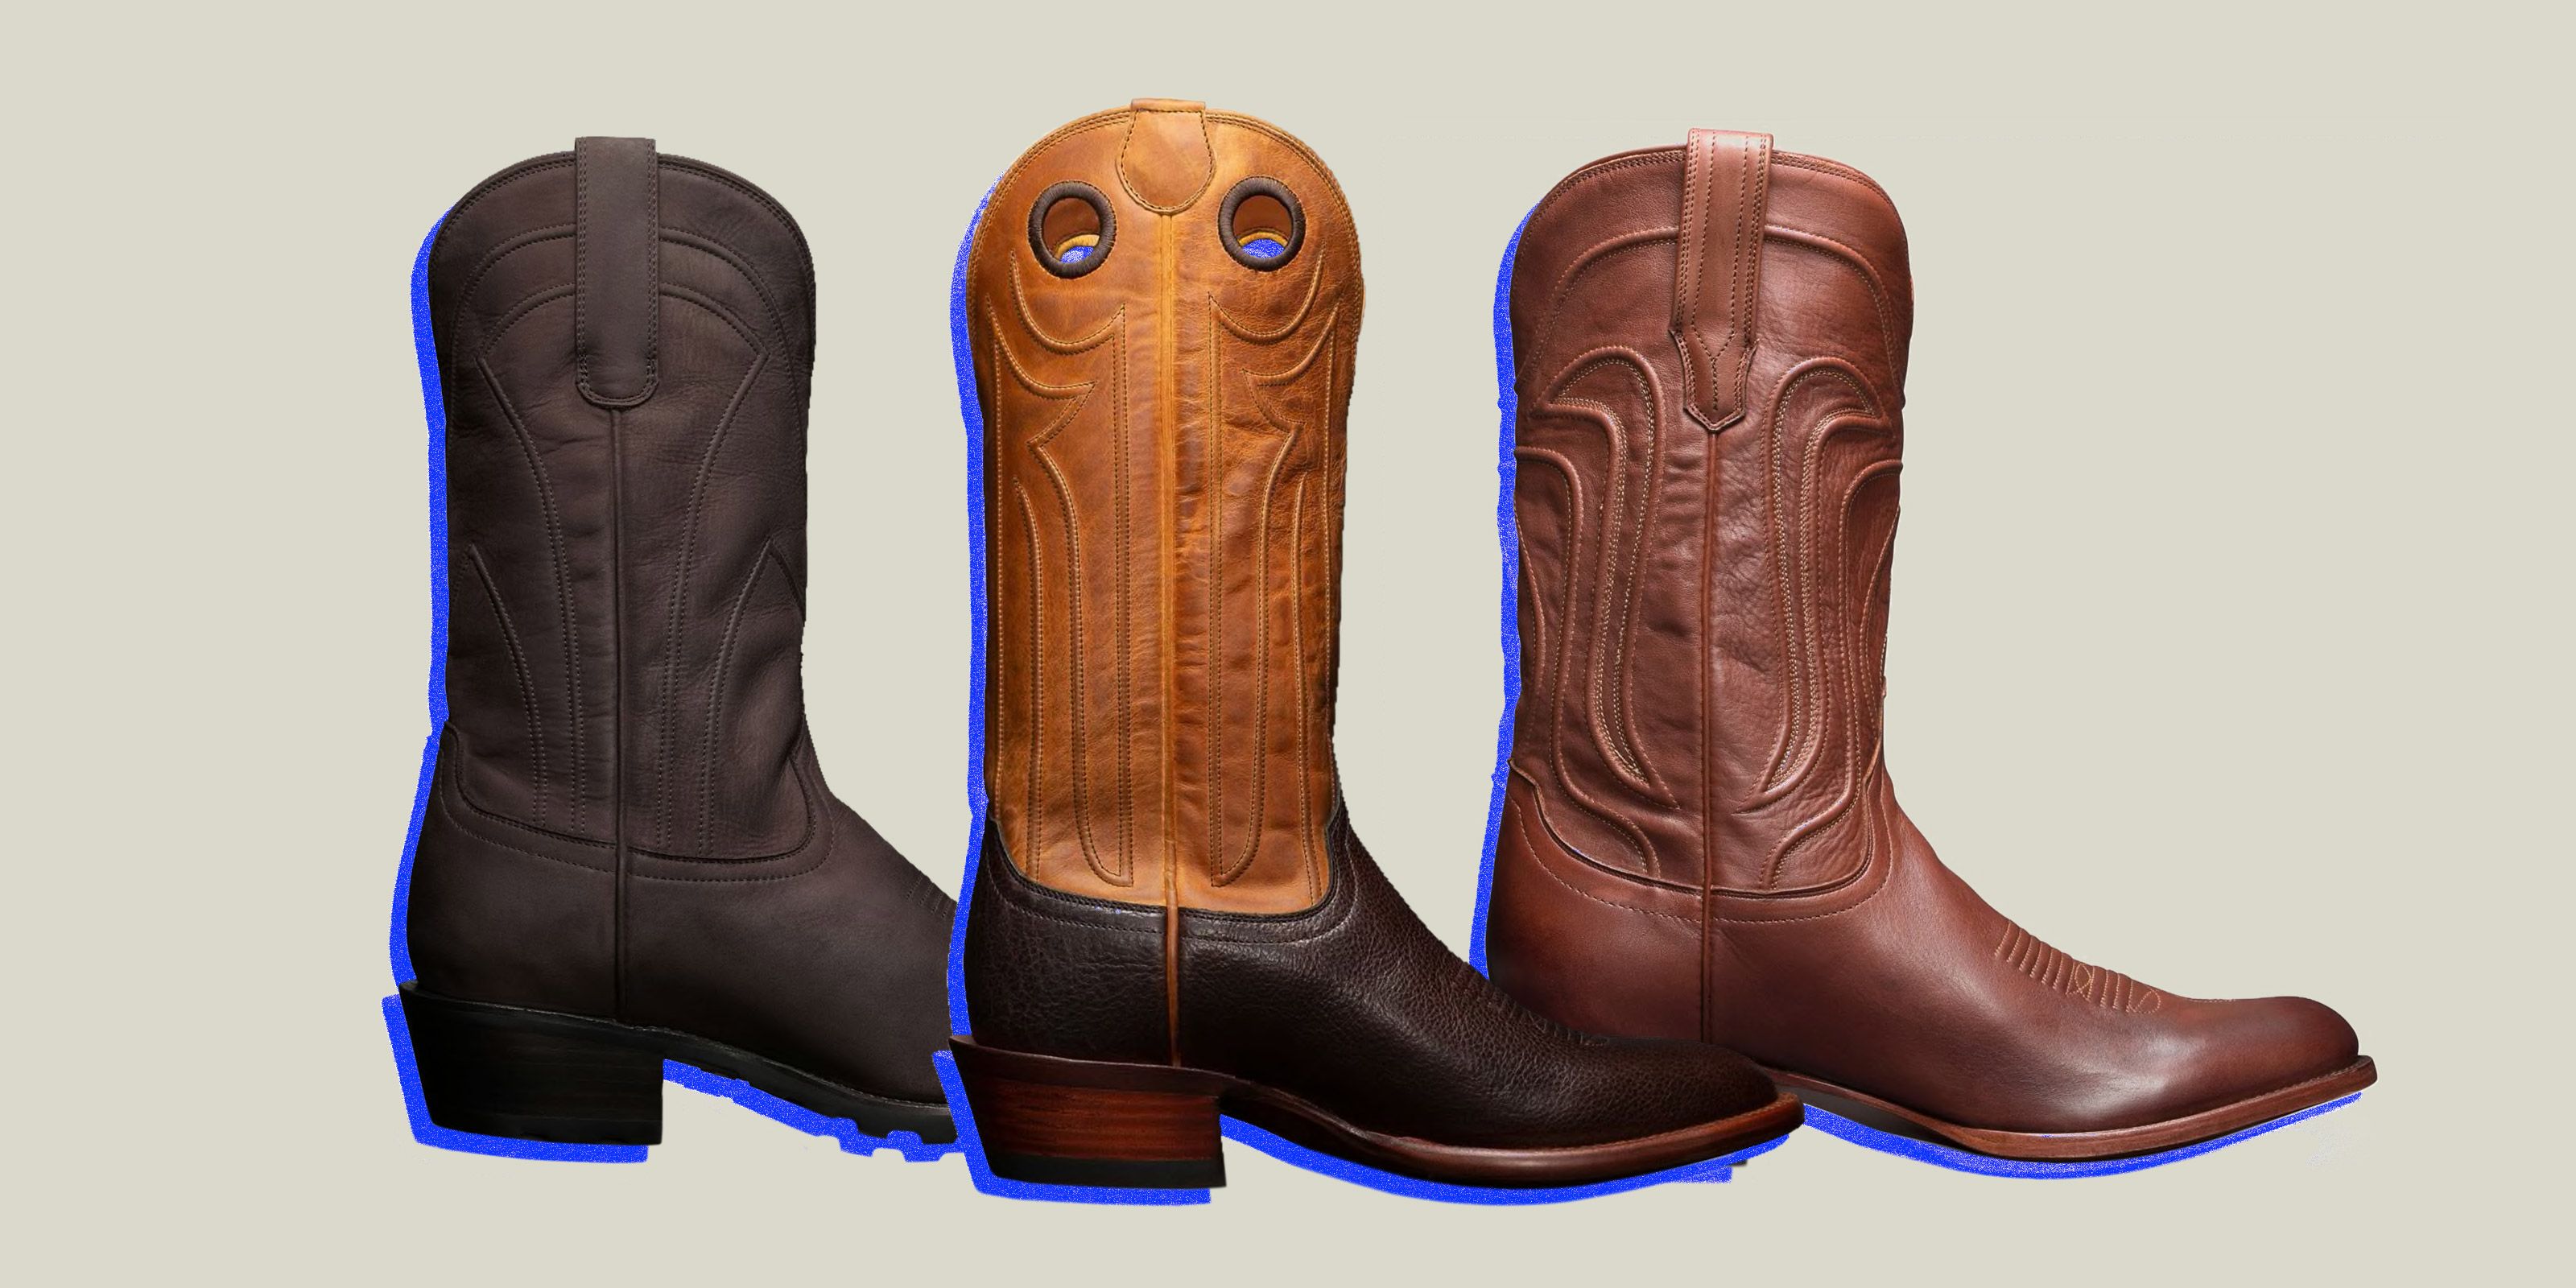 Everything You Need to Know About Tecovas' Boots